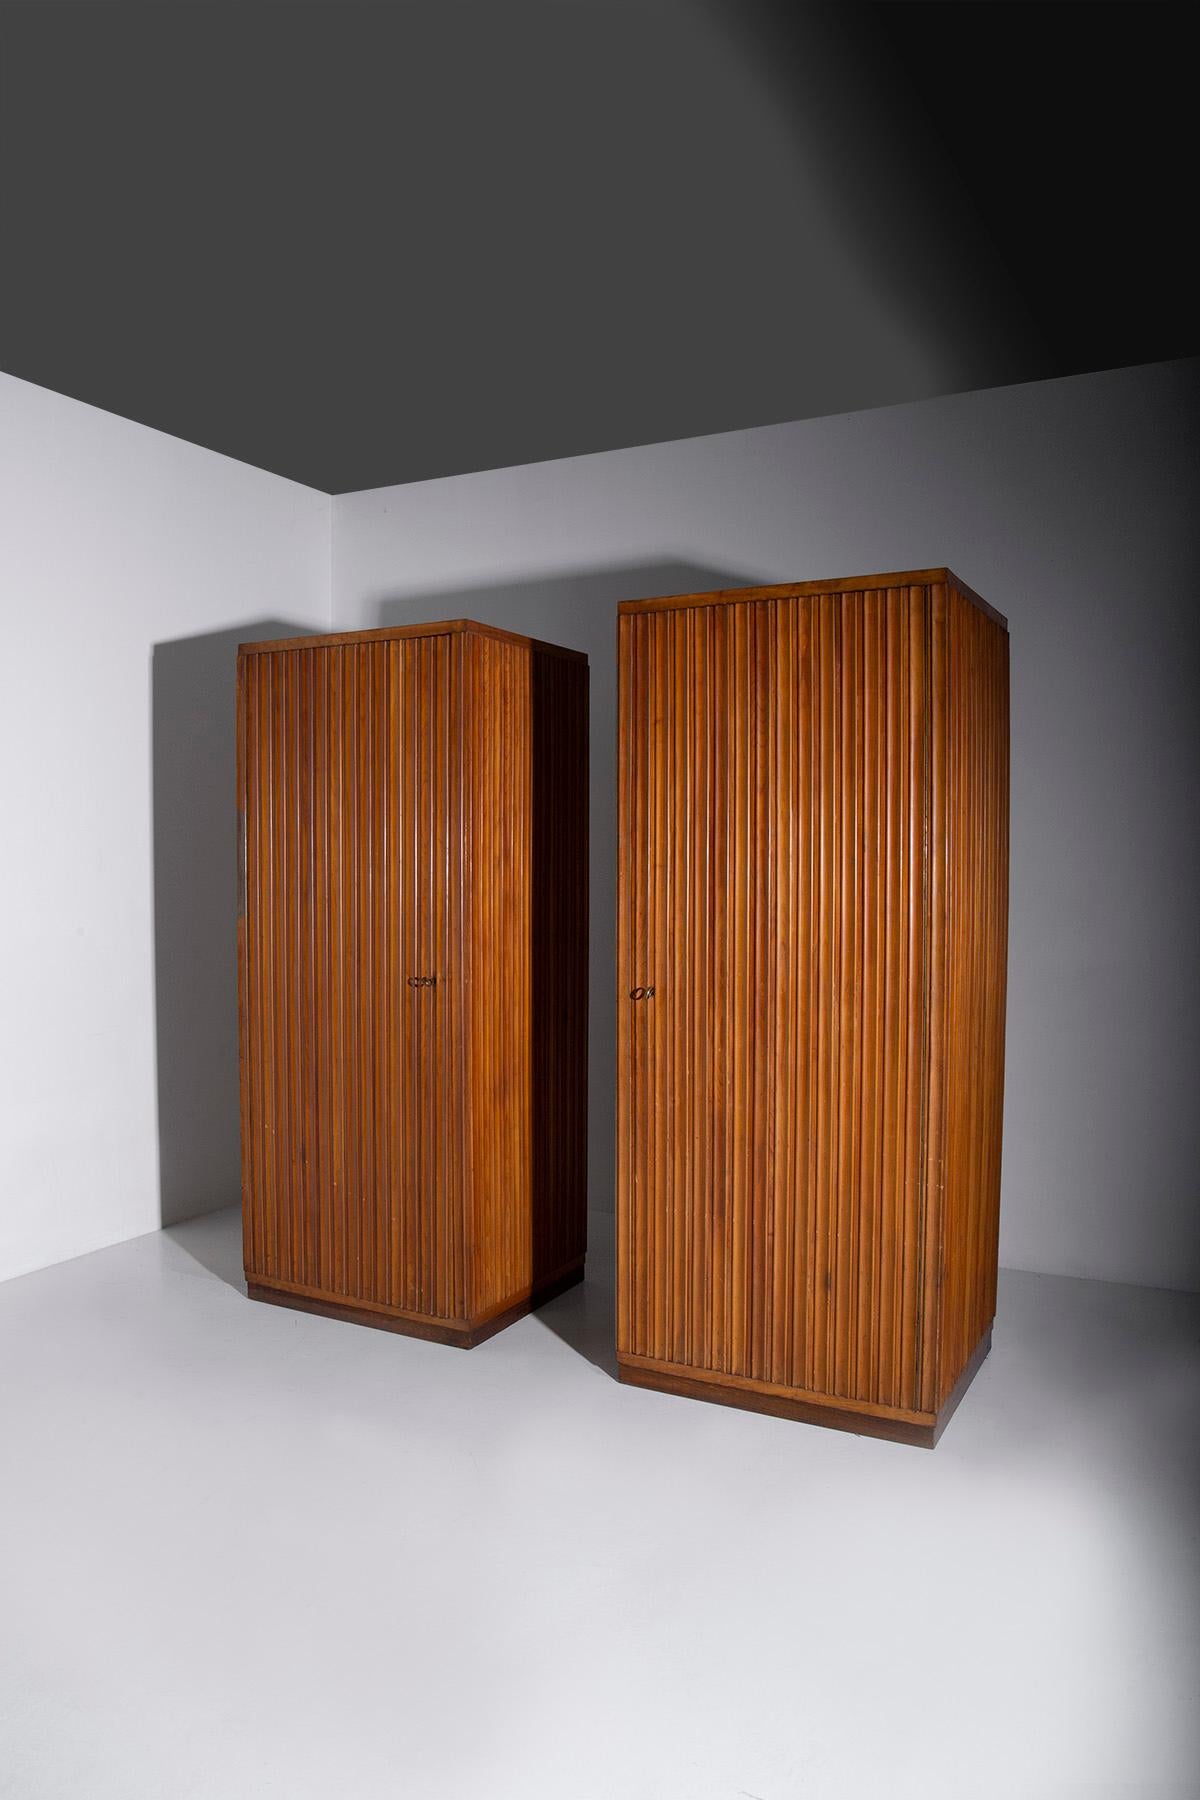 In the enchanting era of the 1950s, Italian craftsmanship reached its zenith, and the Elegant Grissinato Closets by Fabbrica Mobili e Armadi Triestina, attributed to the skilled hands of Luigi Scremin, stand as timeless testaments to that glorious